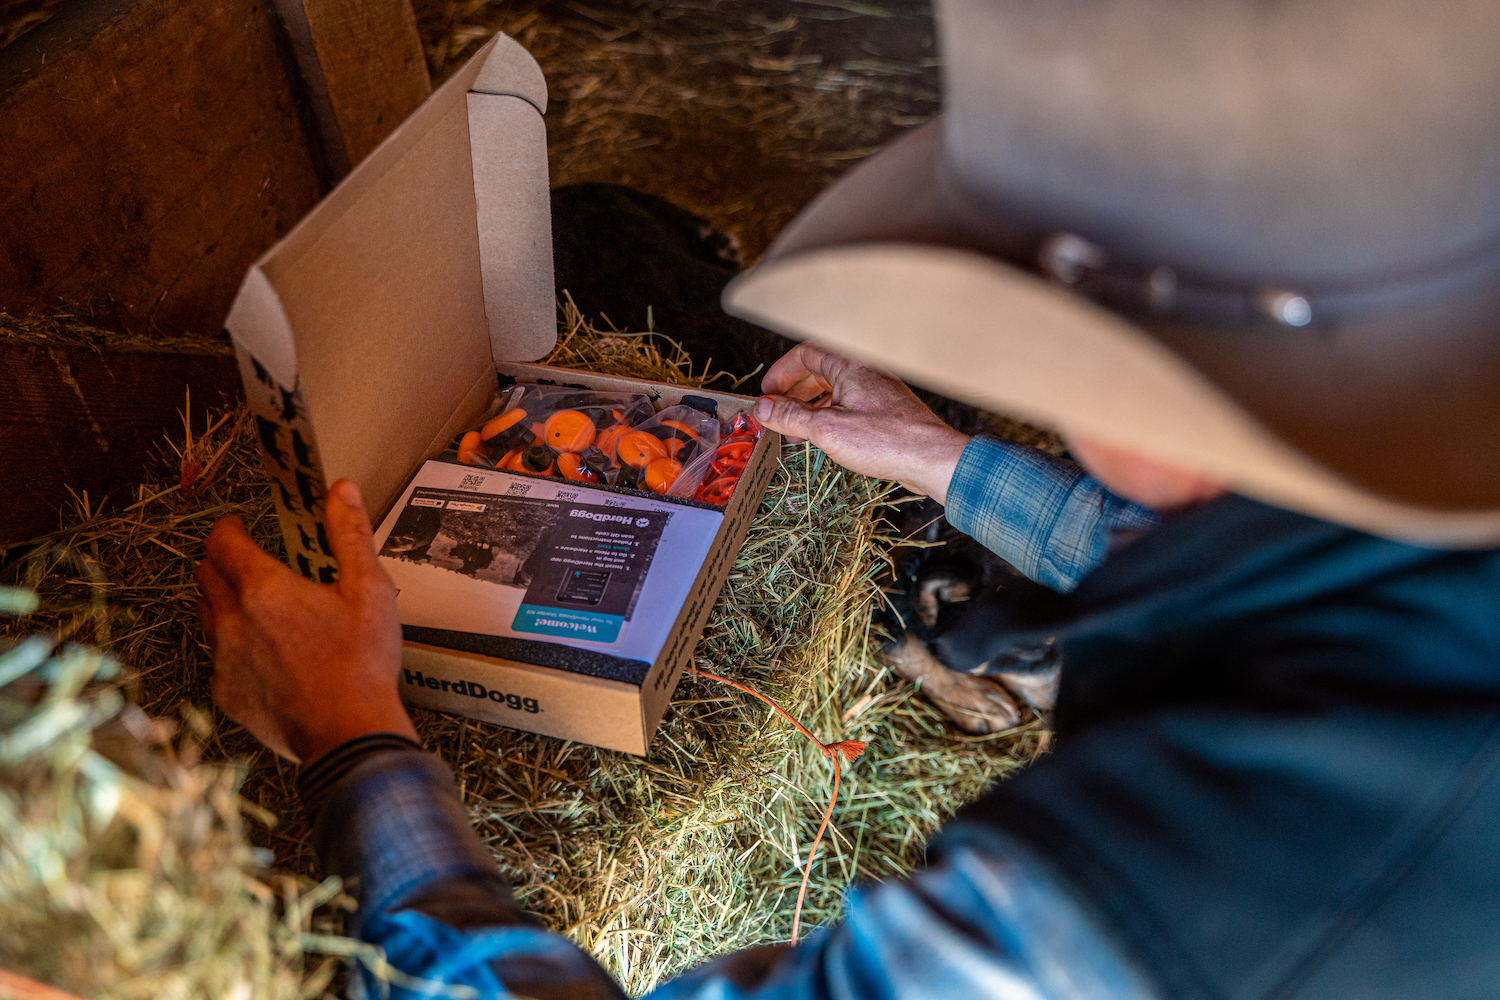 HerdDogg offers a complete range of devices that work together to cover a wide range of needs you may have for your livestock.